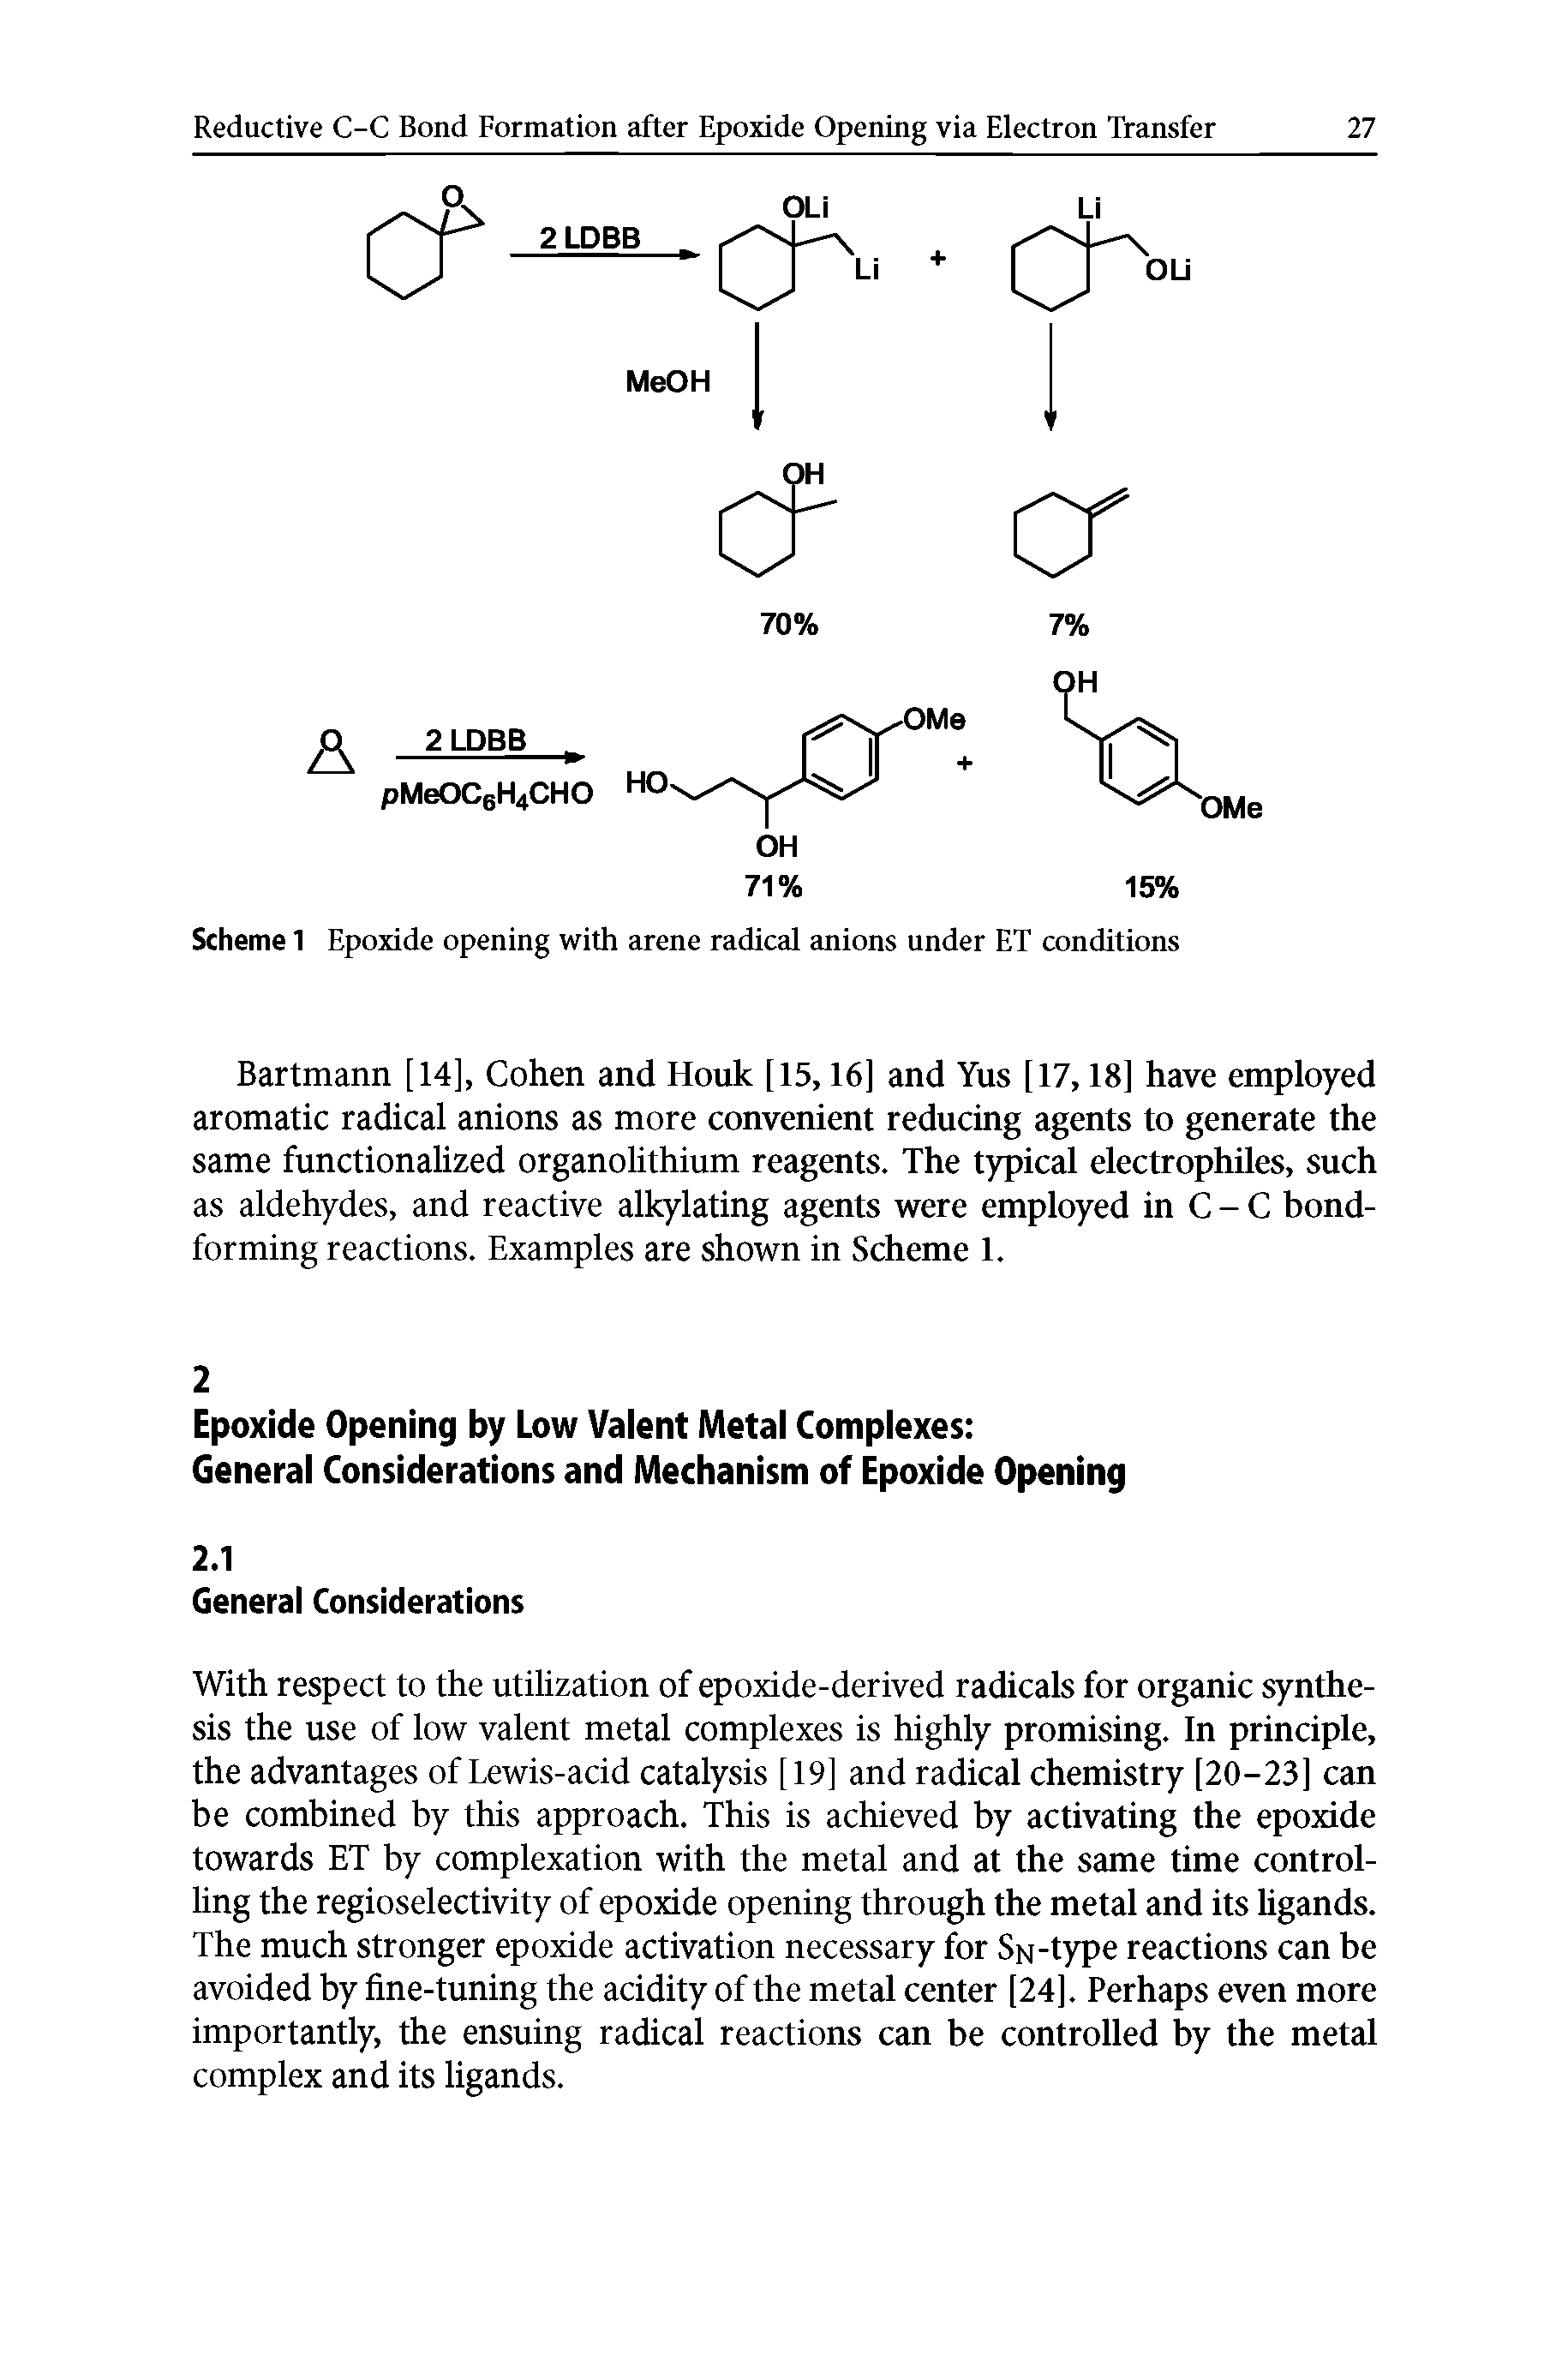 Scheme 1 Epoxide opening with arene radical anions under ET conditions...